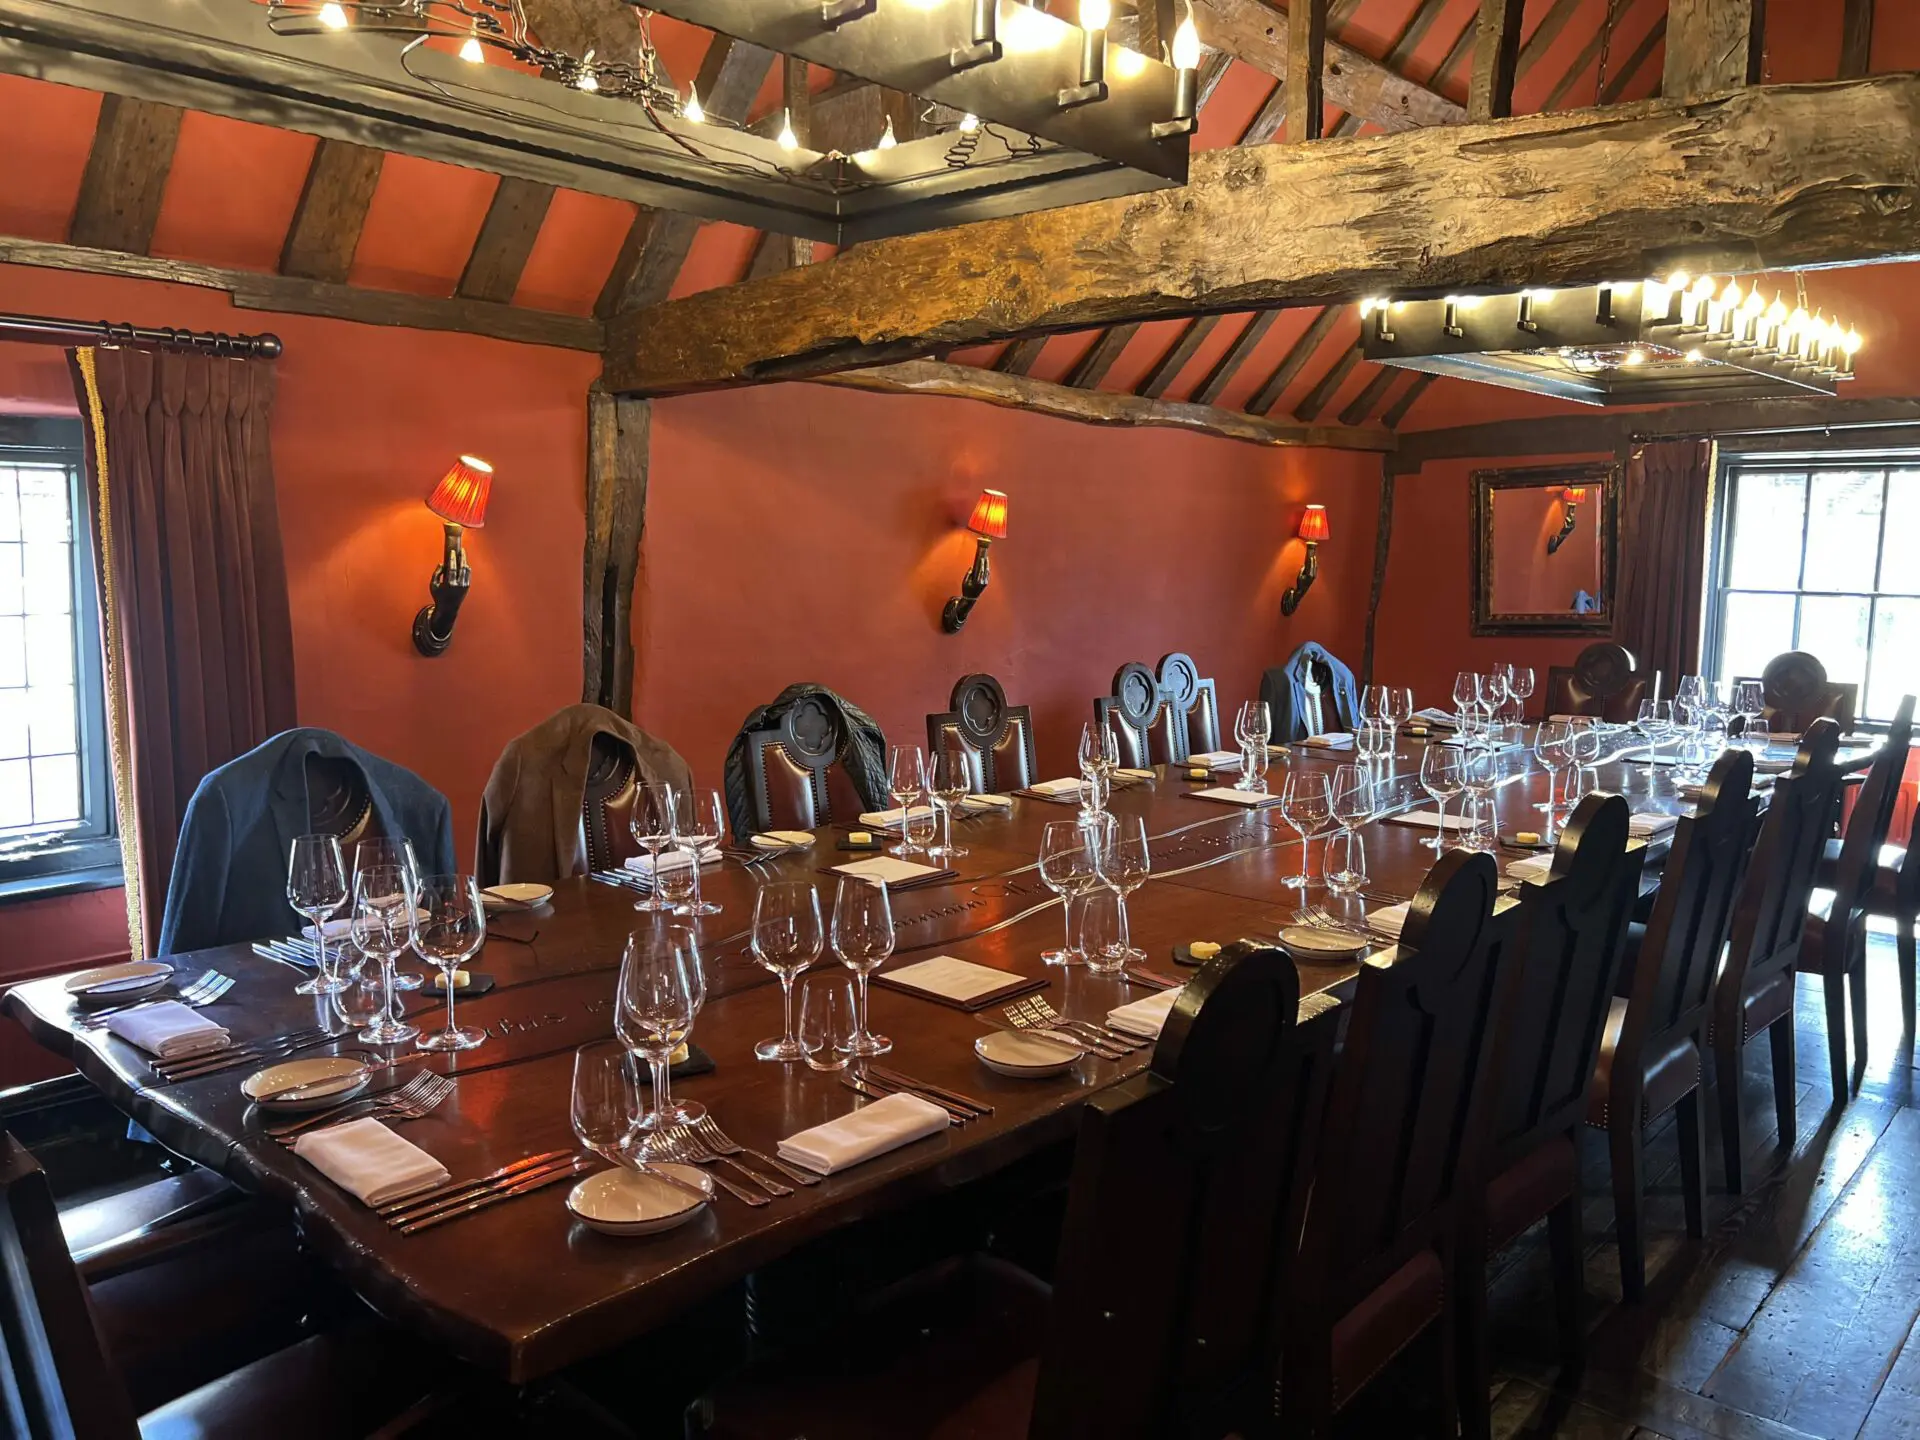 Private dining room in the Hind's Head